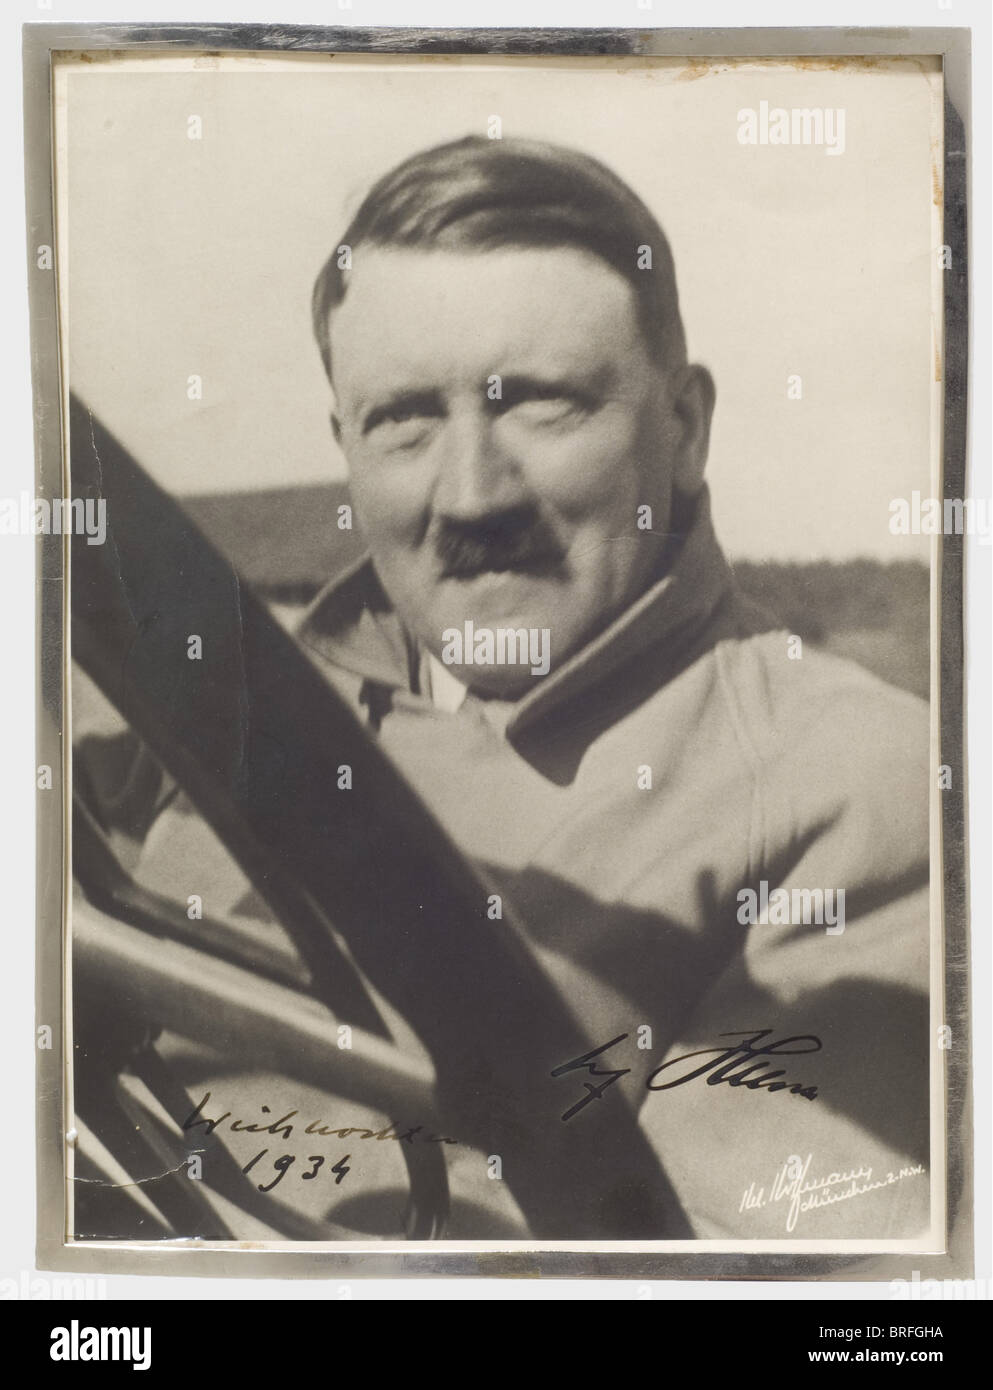 Adolf Hitler - autograph signature and date,in thick,black ink 'Weihnachten 1934 Adolf Hitler'(Christmas 1934 Adolf Hitler)on a large format Hoffmann photograph of Hitler in an overcoat sitting in the passenger's seat of an Mercedes convertible. The photographer's signature on the lower rim,'H. Hoffmann,München 2.N.W.' and the Hoffmann stamp on the back. Glued to the back piece of a simple,damaged(glass missing)tabletop frame. From the legacy of a high official of Daimler-Benz. historic,historical,people,1930s,20th century,NS,National Socialism,,Additional-Rights-Clearences-Not Available Stock Photo